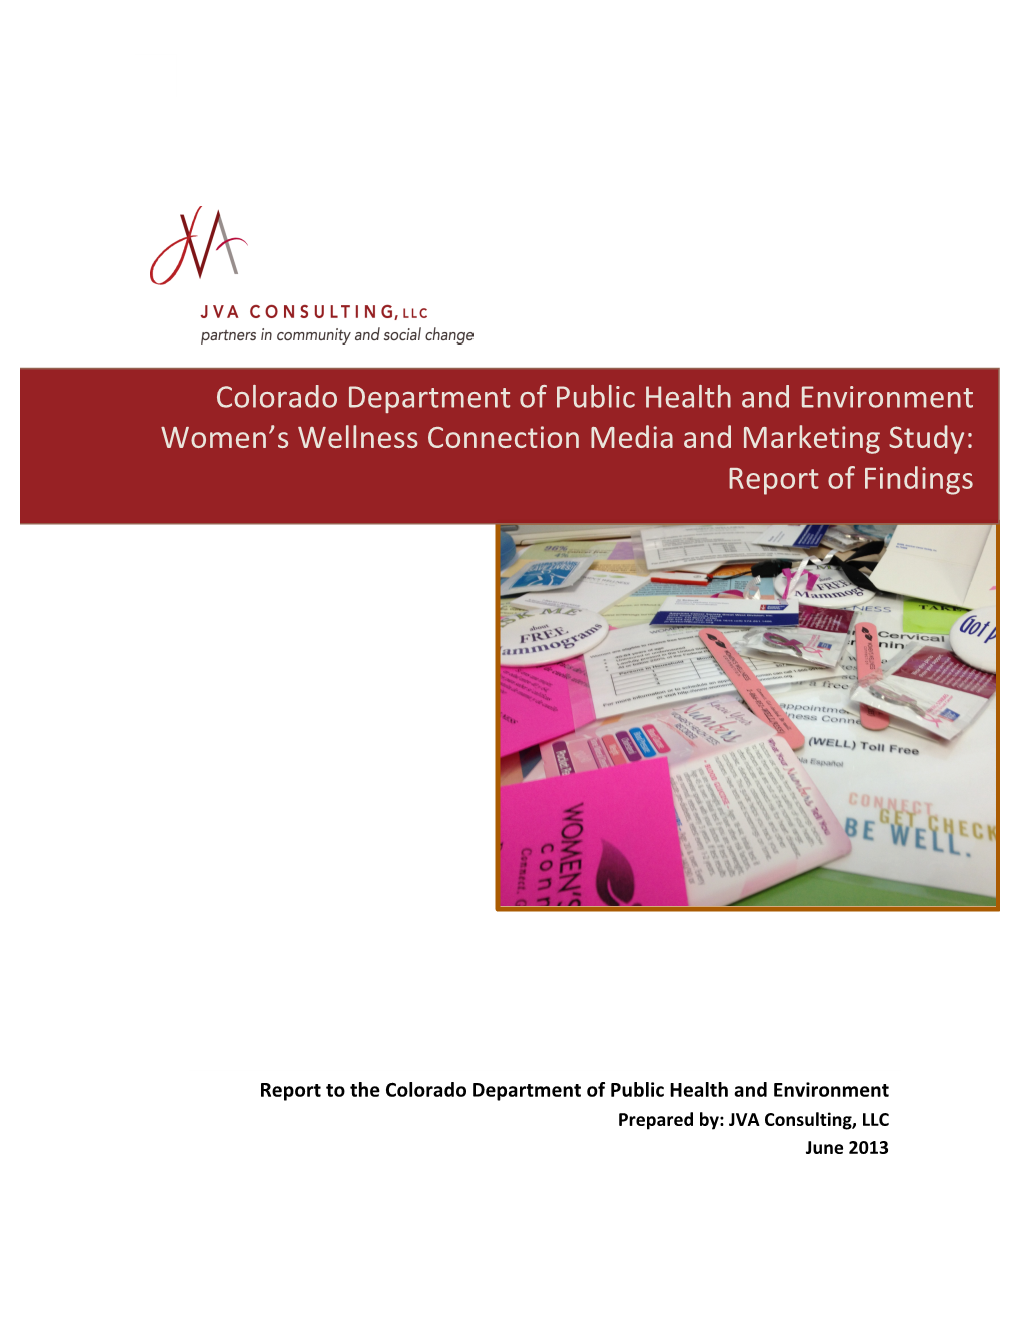 Colorado Department of Public Health and Environment Women's